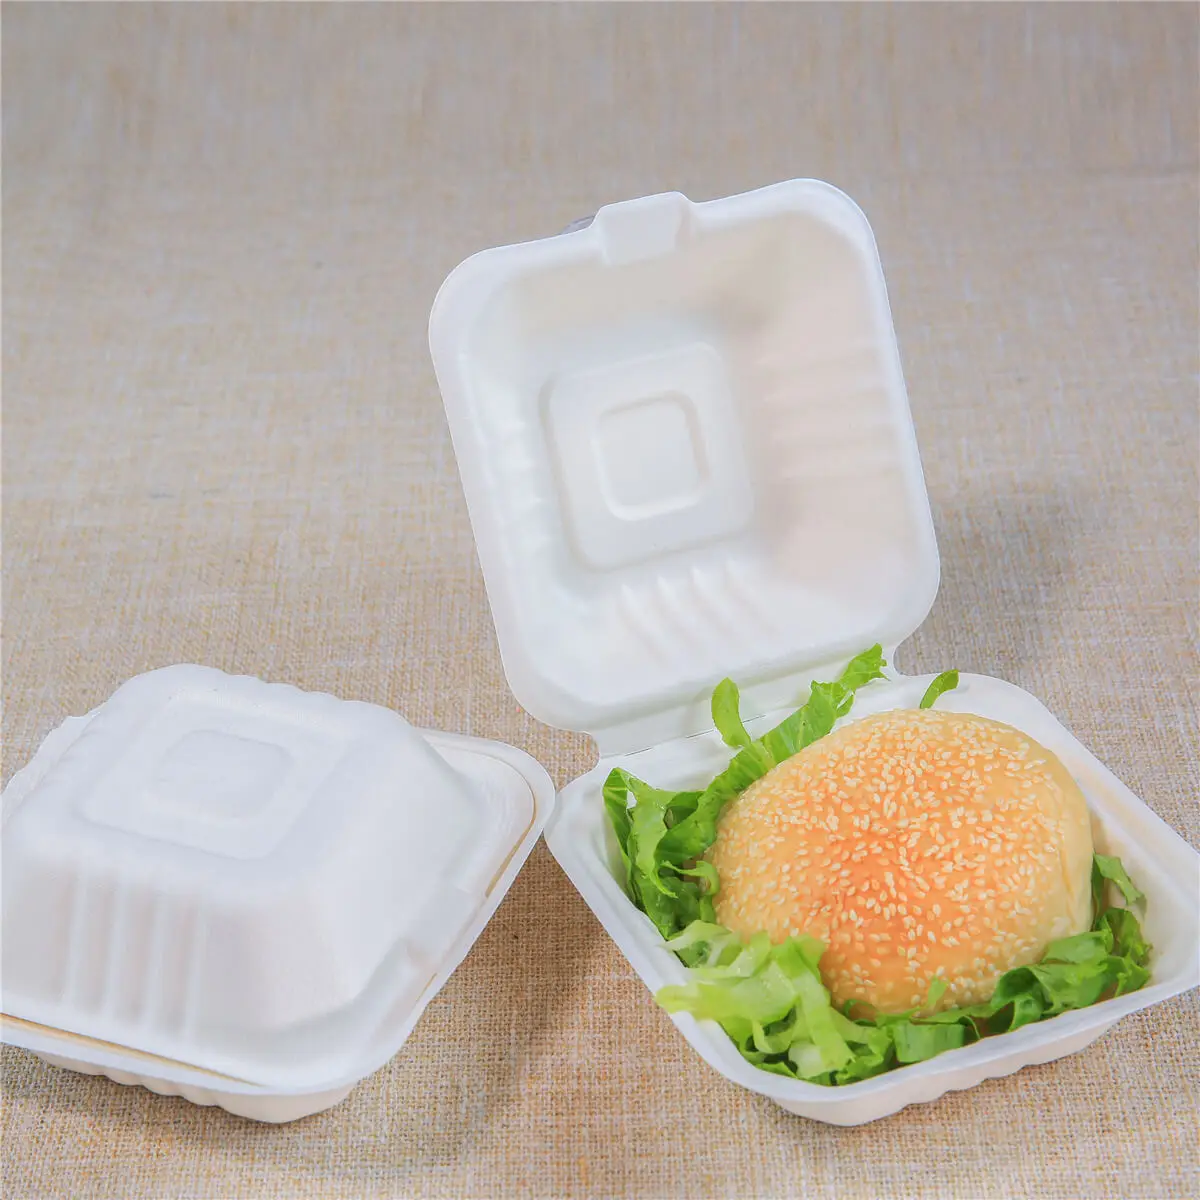 Bio Container Plastic Containers Groothandel Australië - Buy Bio Container,Plastic Verpakkingen Containers,Bento Box Groothandel Product on Alibaba.com